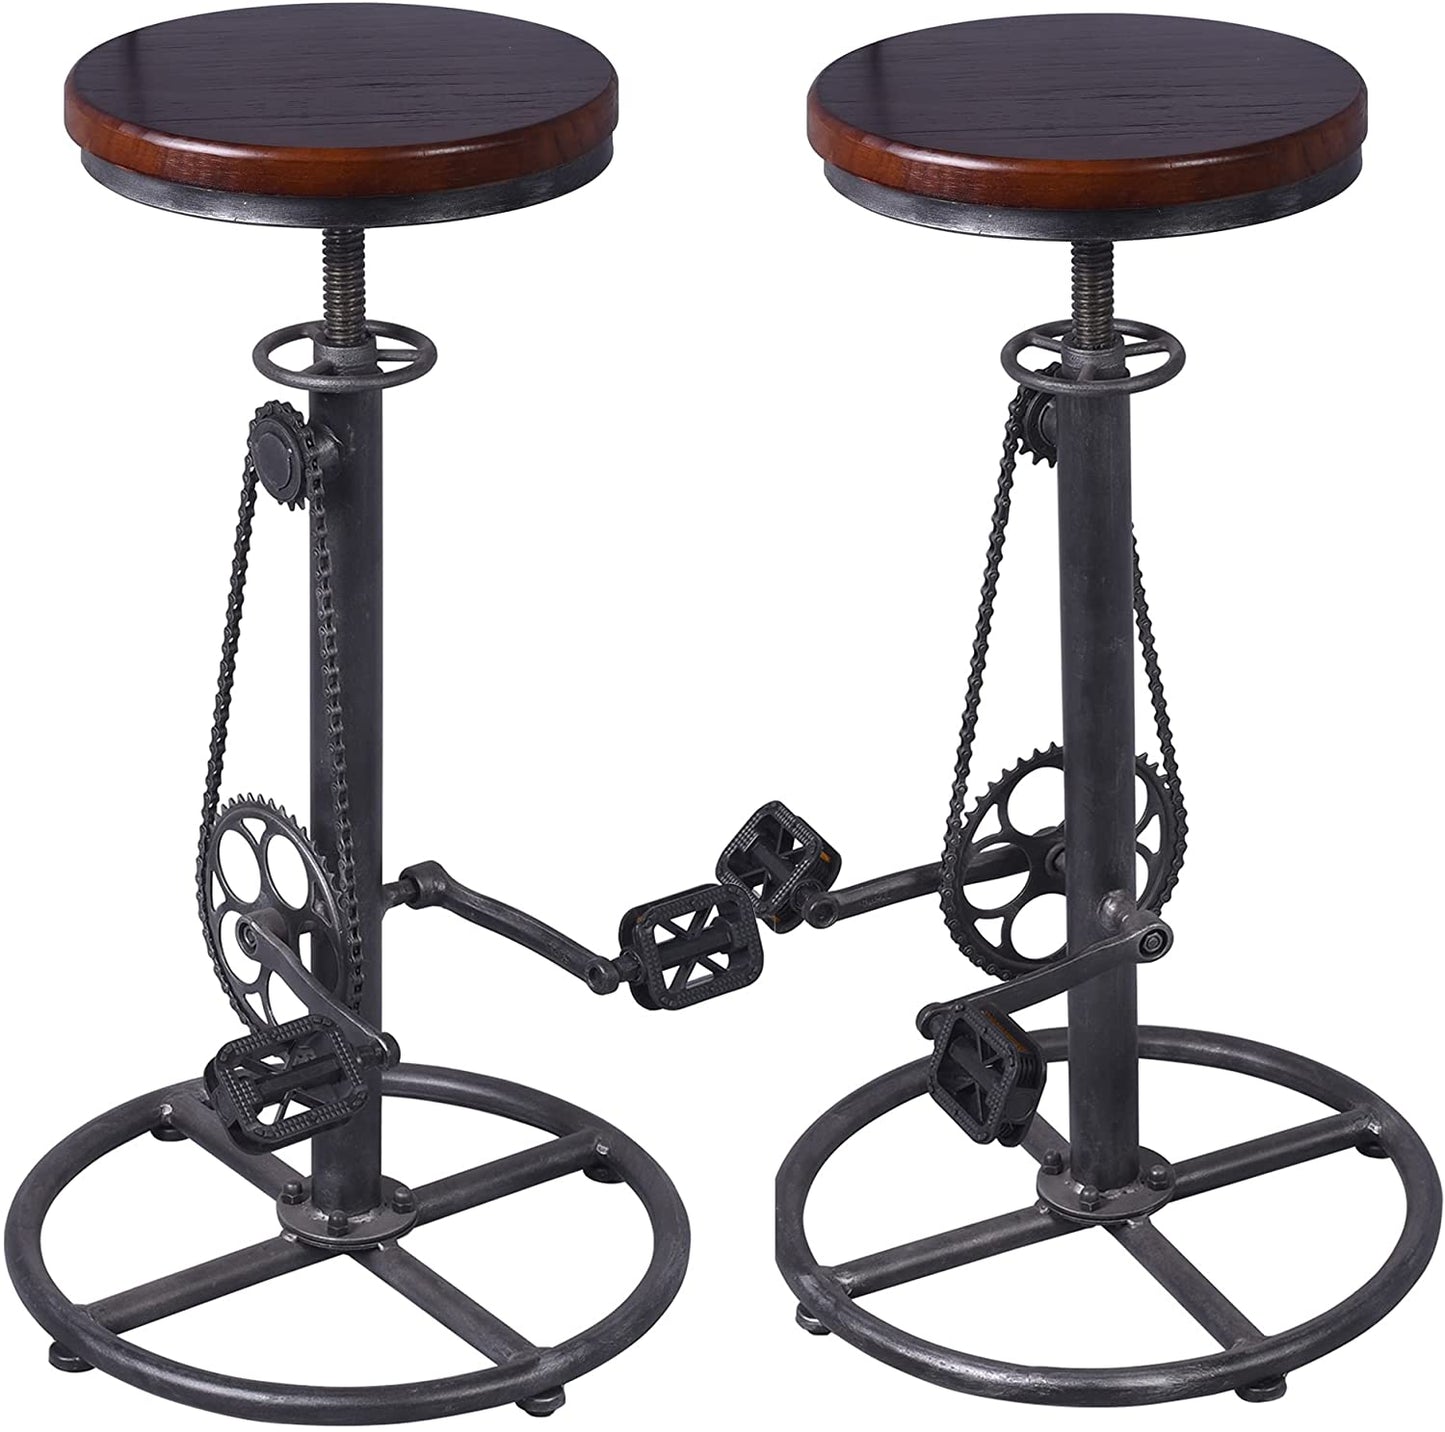 Set of 2 Industrial Bar Stool-Swivel Vintage Coffee Kitchen Dining Island Chair-Bike Pedal Footrest-Extra Tall Pub Height Adjustable 29-37"